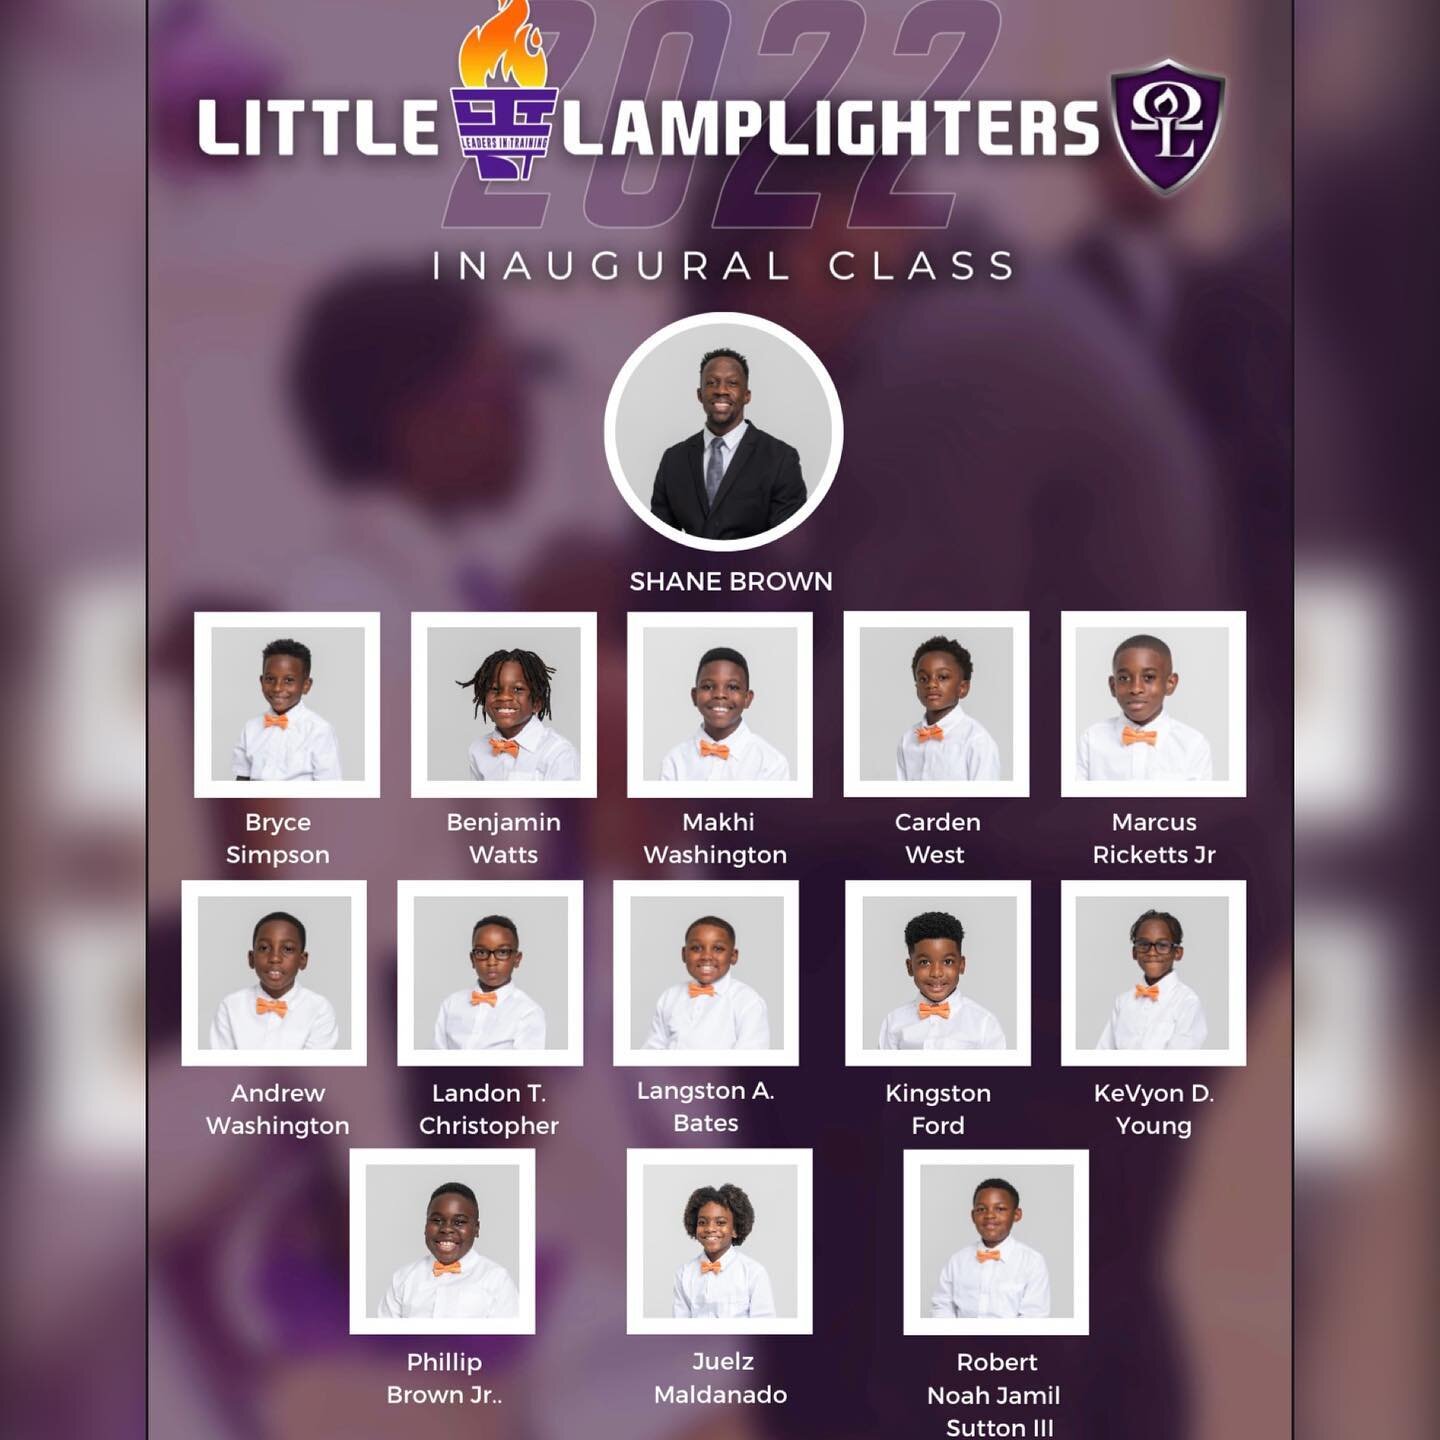 Class I 💜🔥🧡‼️
#weLeadTheWay #OmegaLamplighters #JuniorLamplighters #LITLamplighters #CrownsOnly👑💜 #Light⚡️Team #DaVillage #LLL